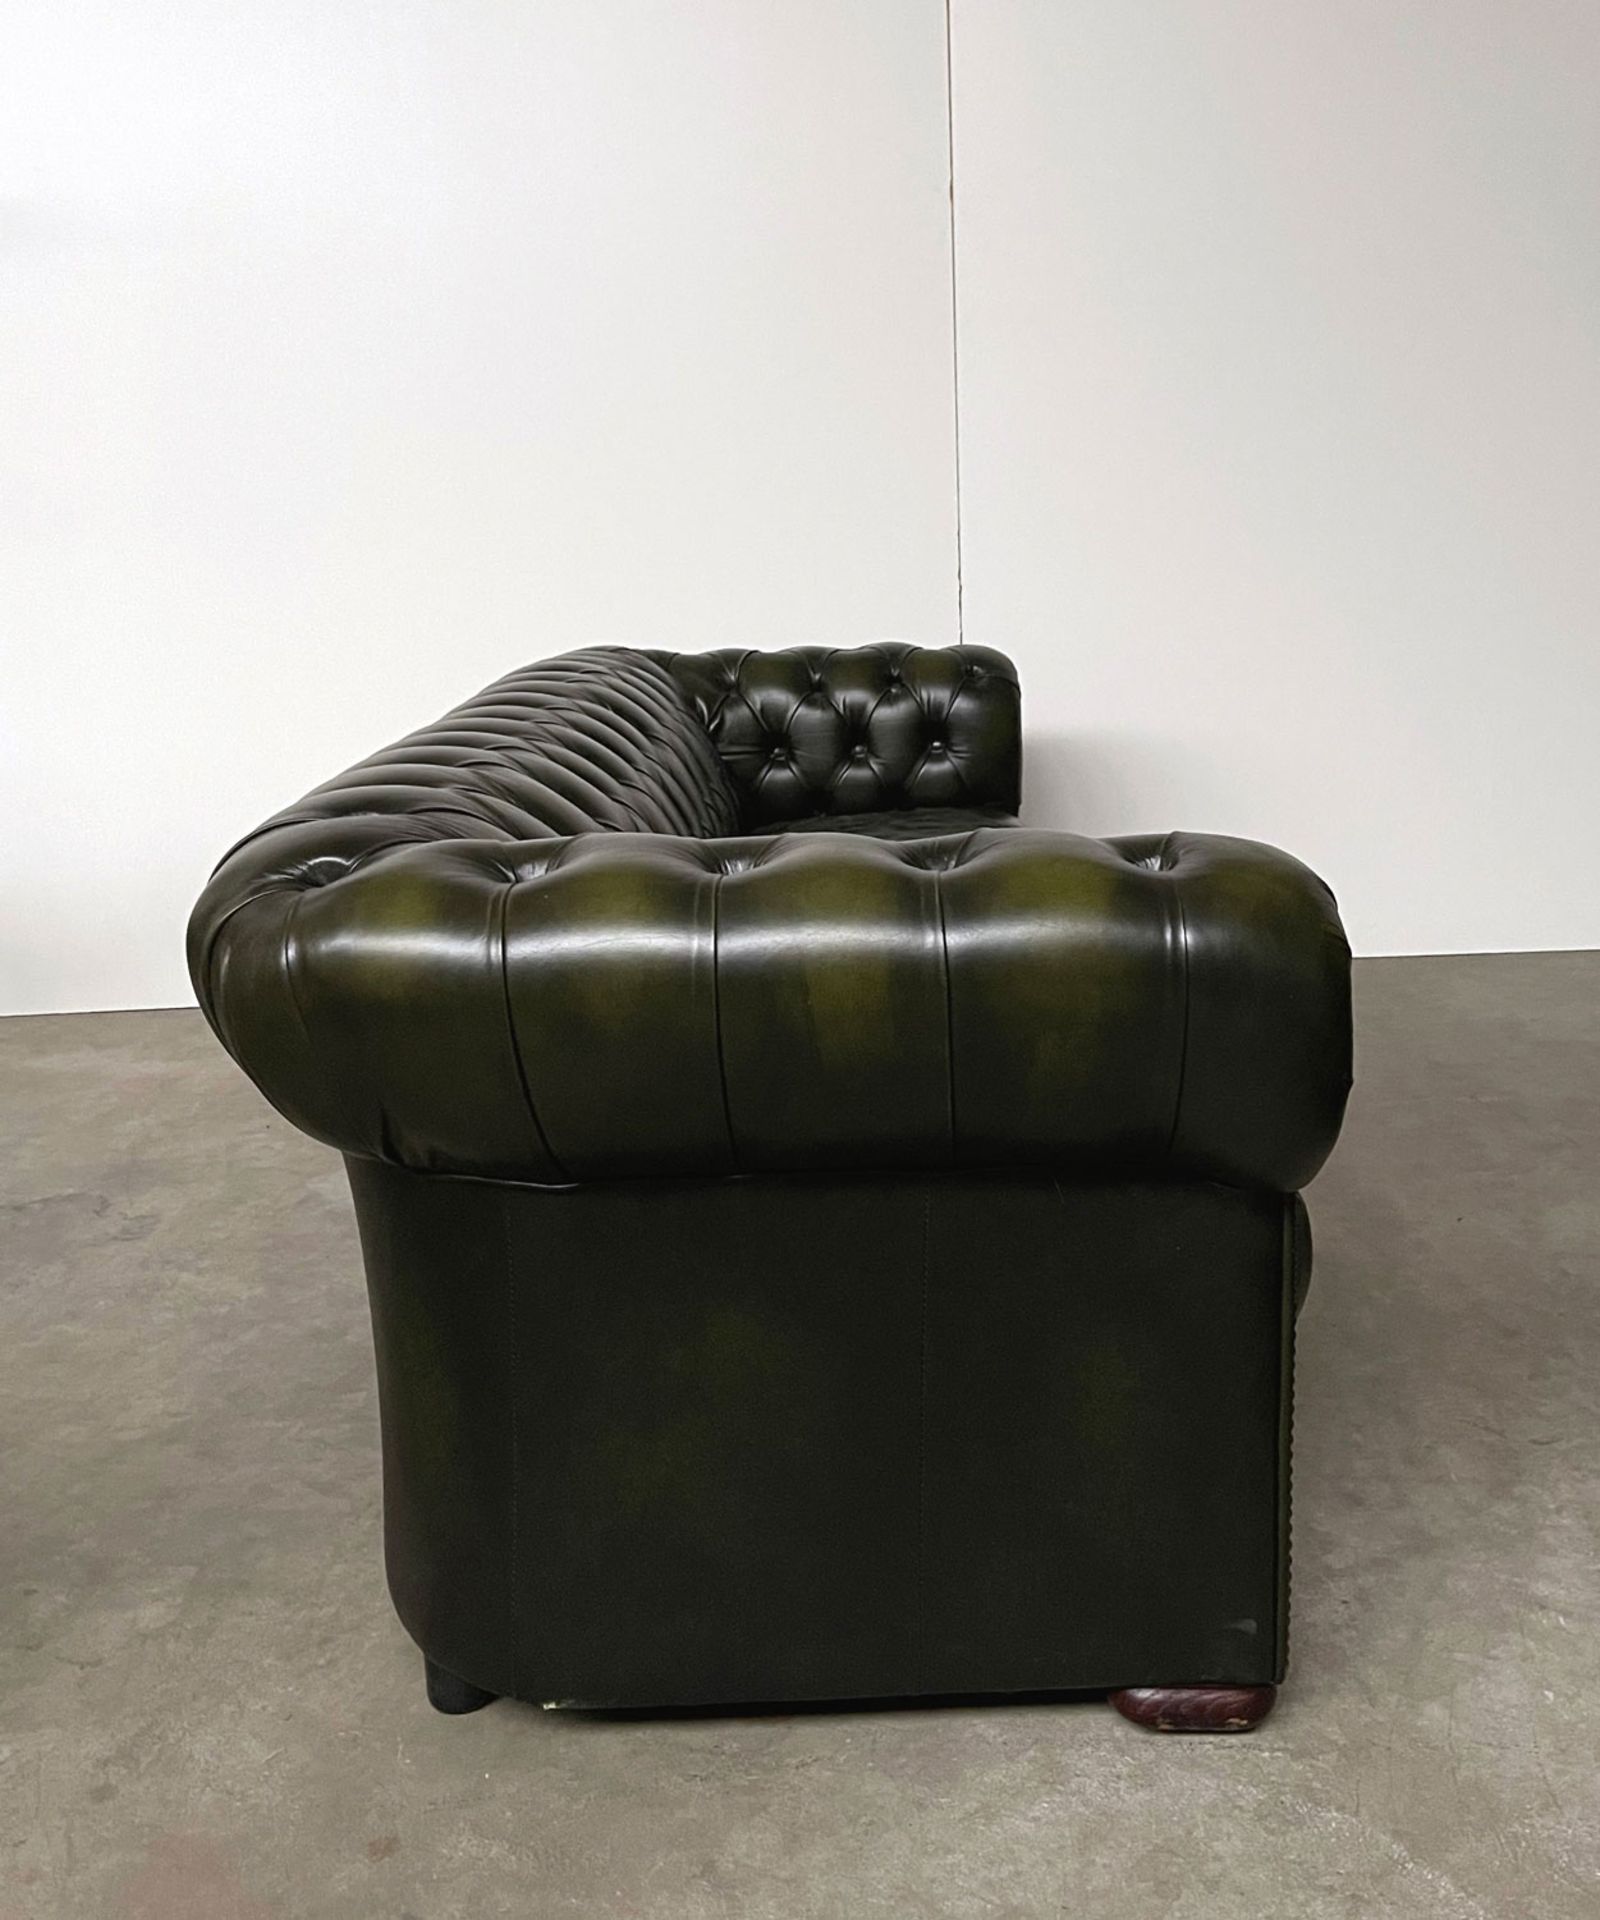 Green Leather Chesterfield Sofa - Image 3 of 10